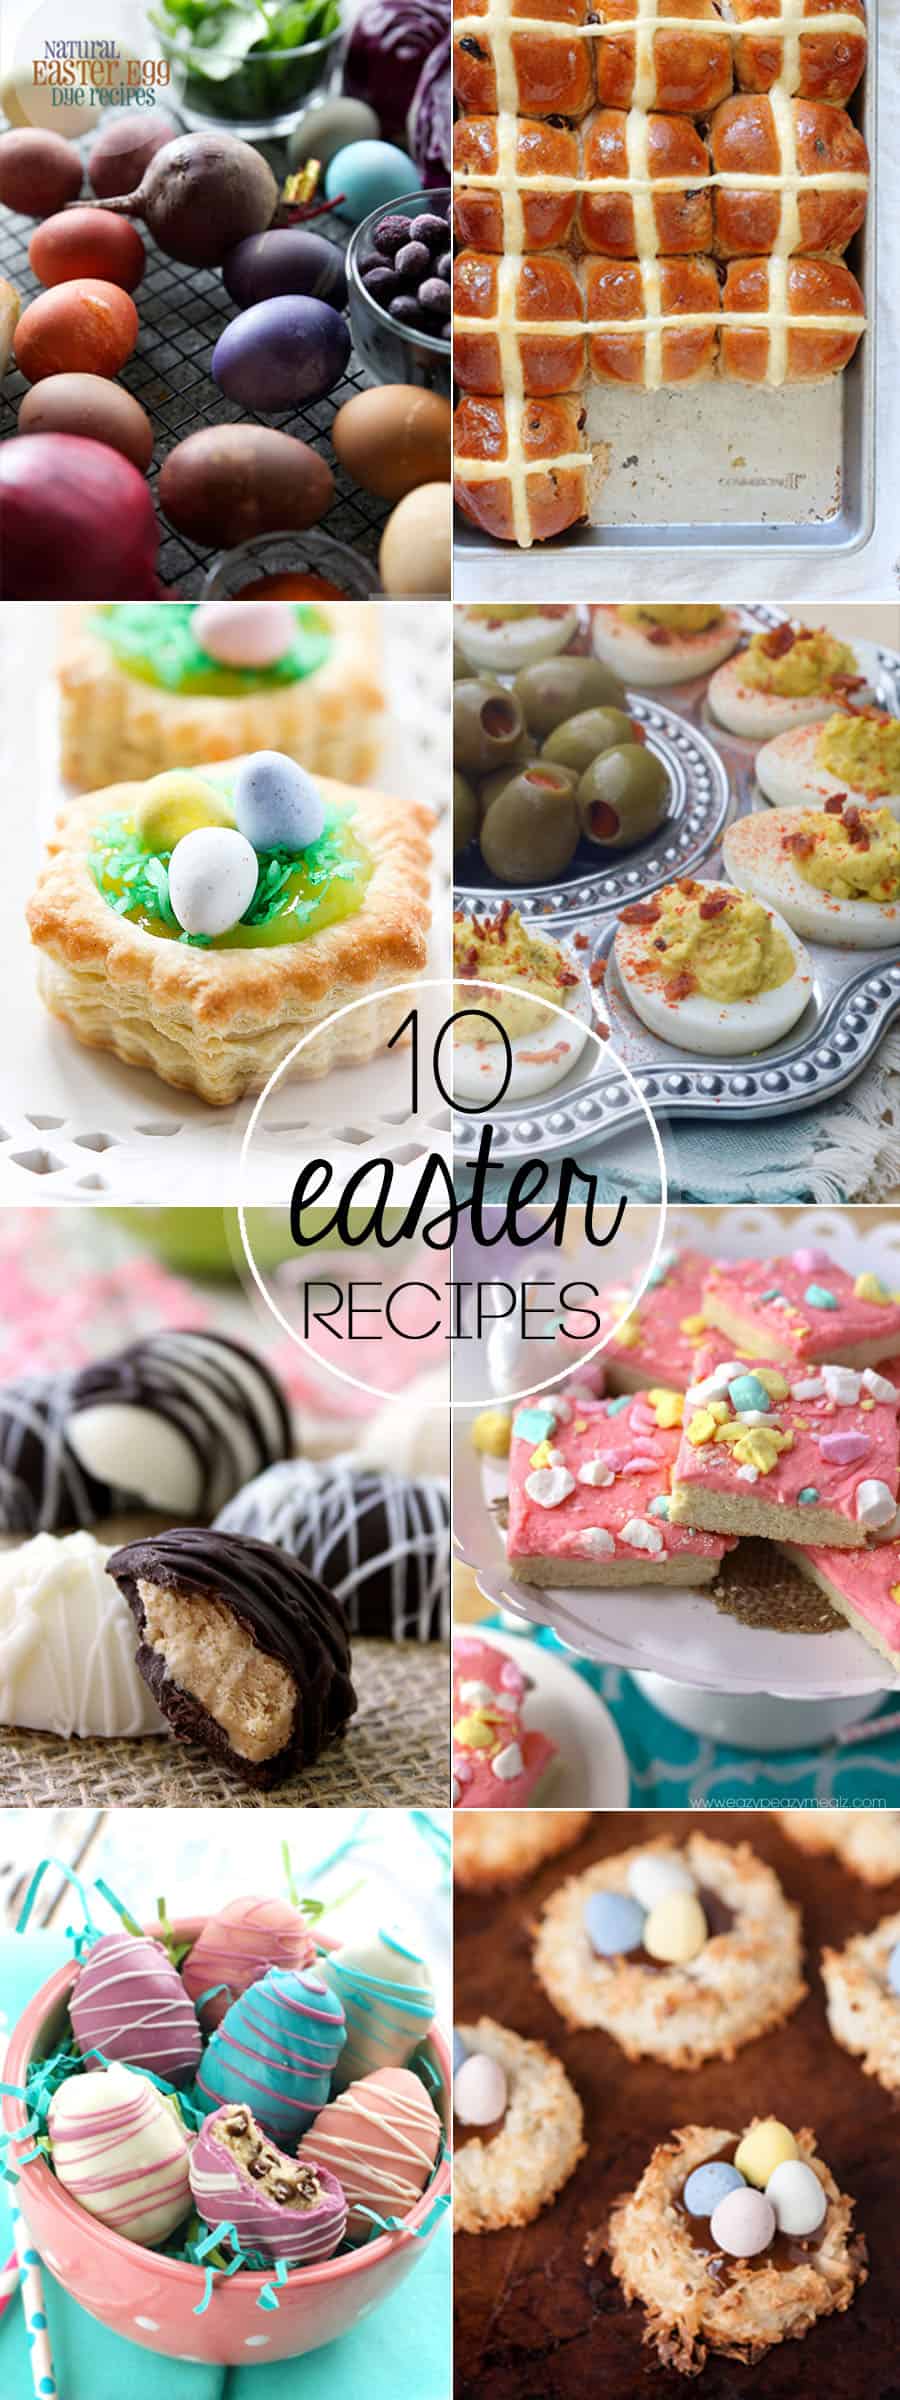 10 of The Most Egg-cellent Easter Recipes // Tried and Tasty